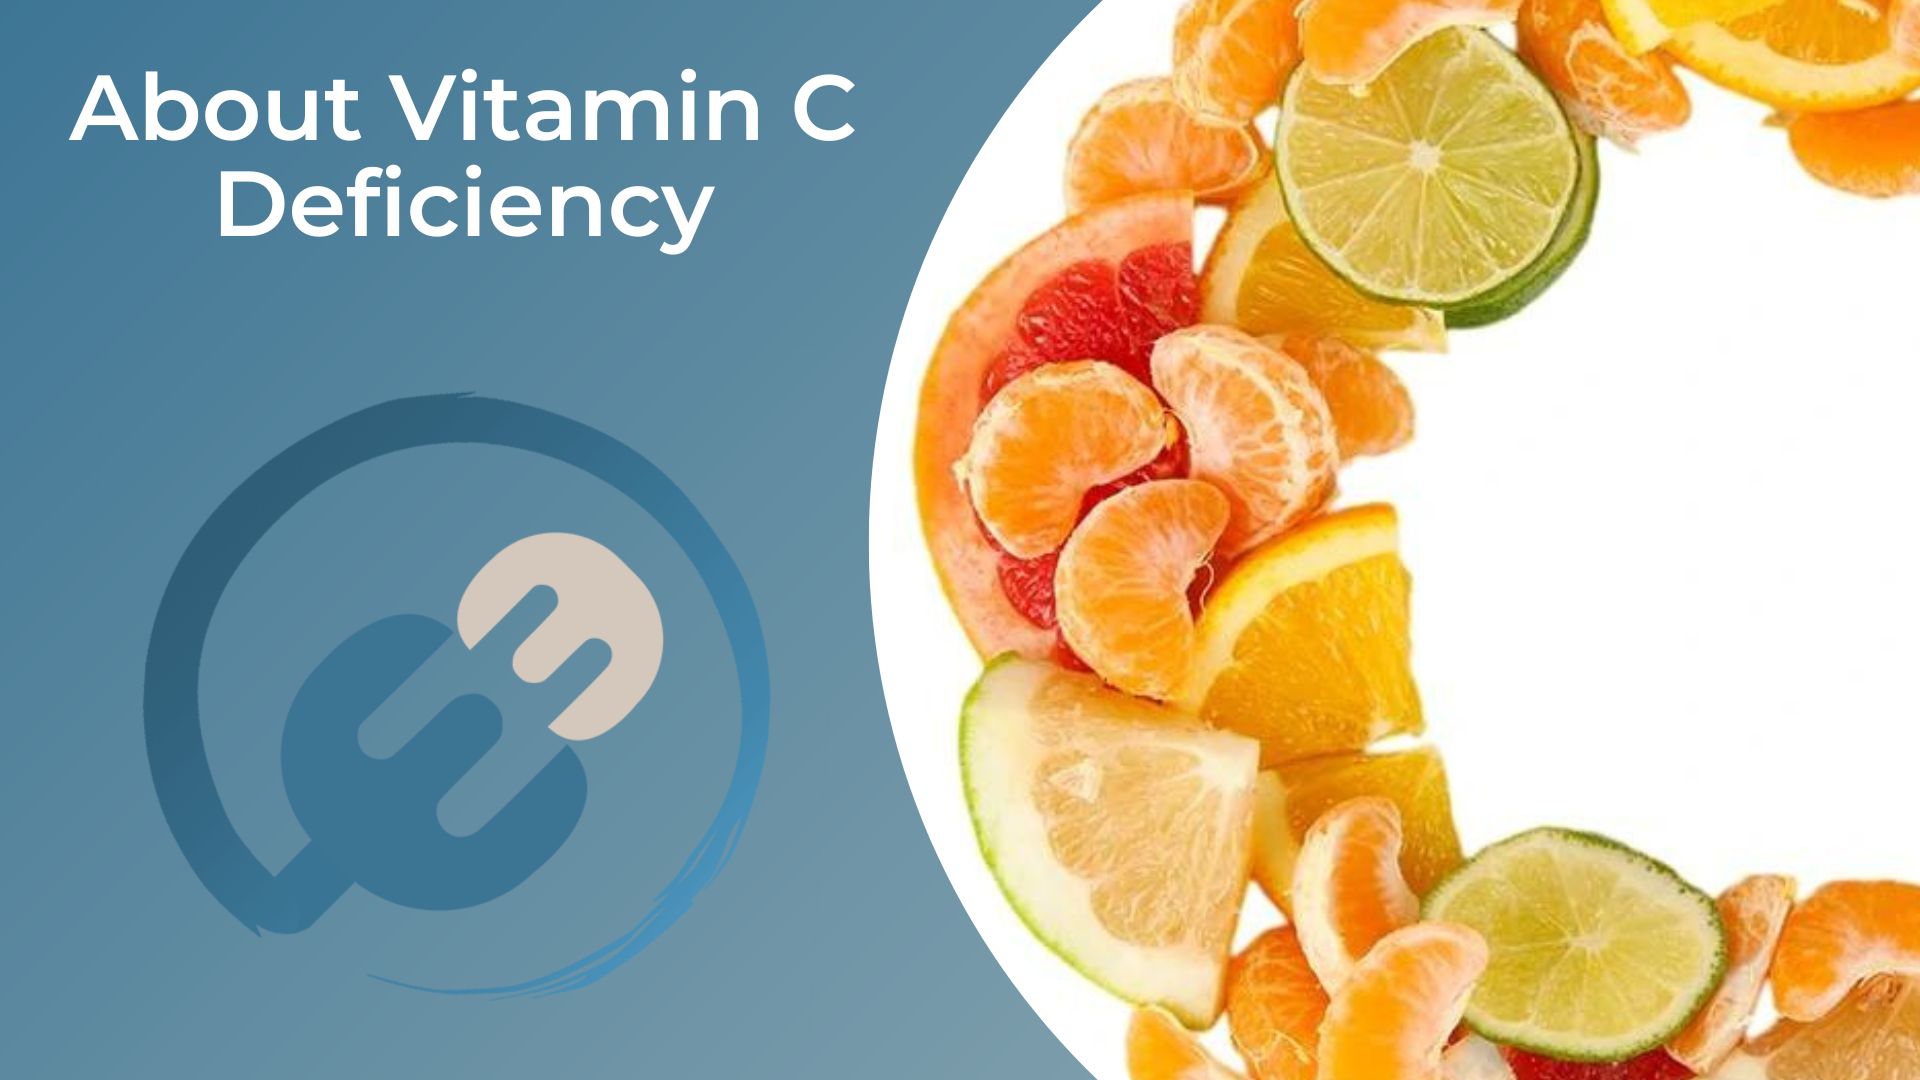 About Vitamin C Deficiency